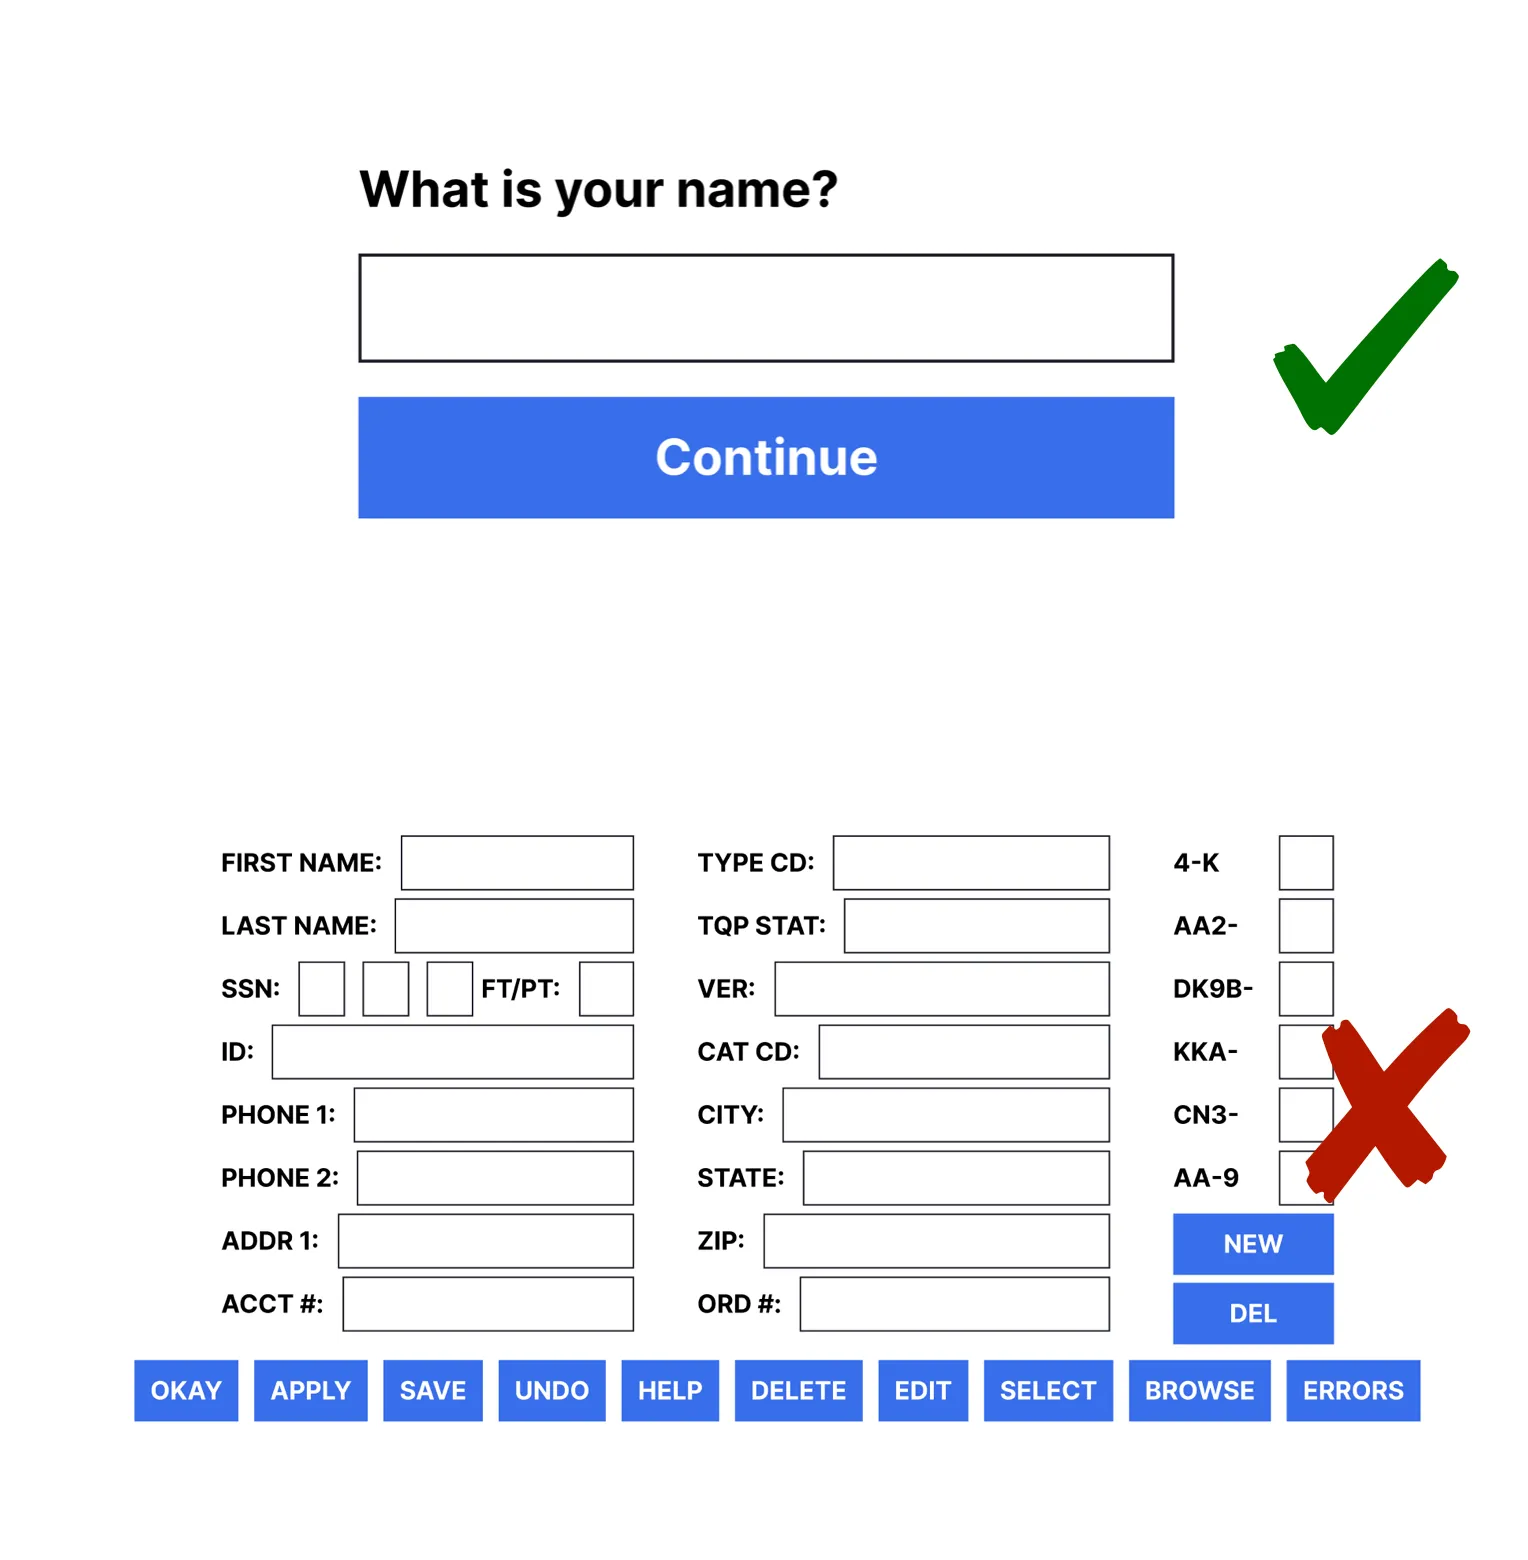 Two user interfaces. One is littered with buttons and form fields. The other is simpler and just has 1 field which reads "what is your name" followed by a single button labelled "continue".